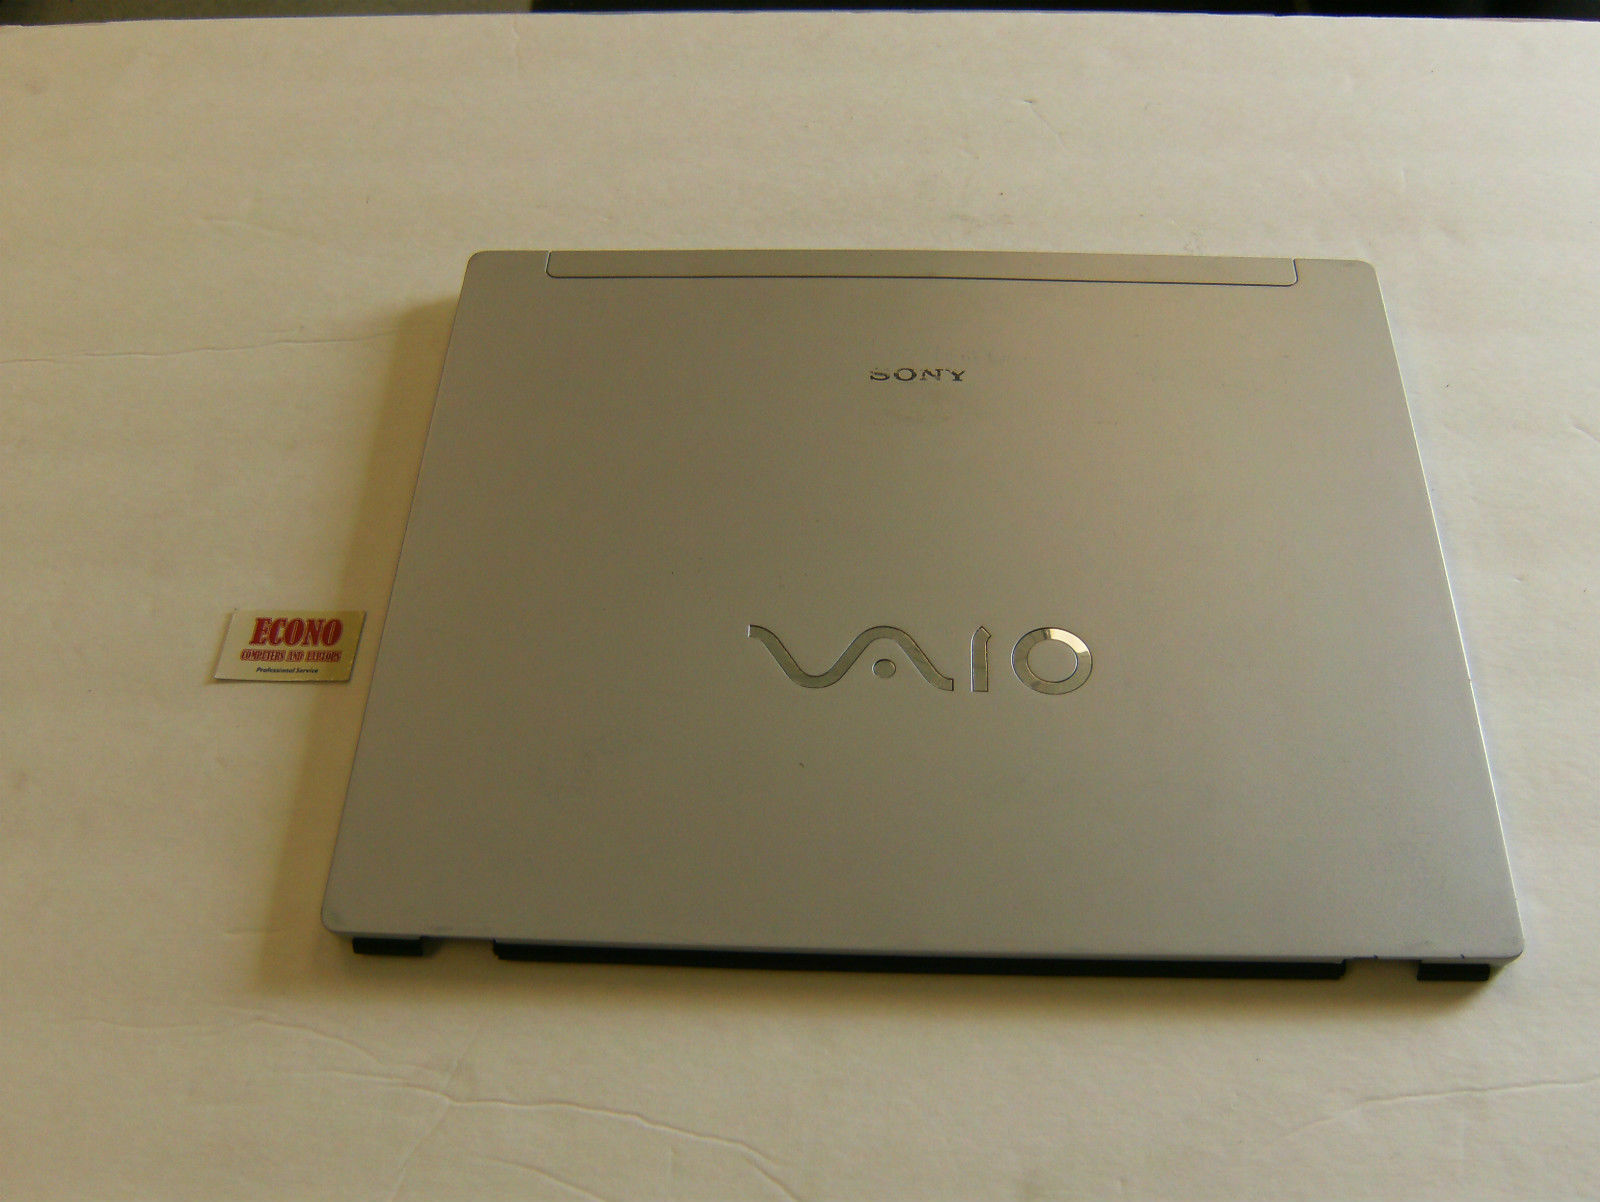 SONY VAIO VGN-BX640P Genuine LCD Back Cover W/ WIFI Antenna P/N 2-639-782 - $5.47